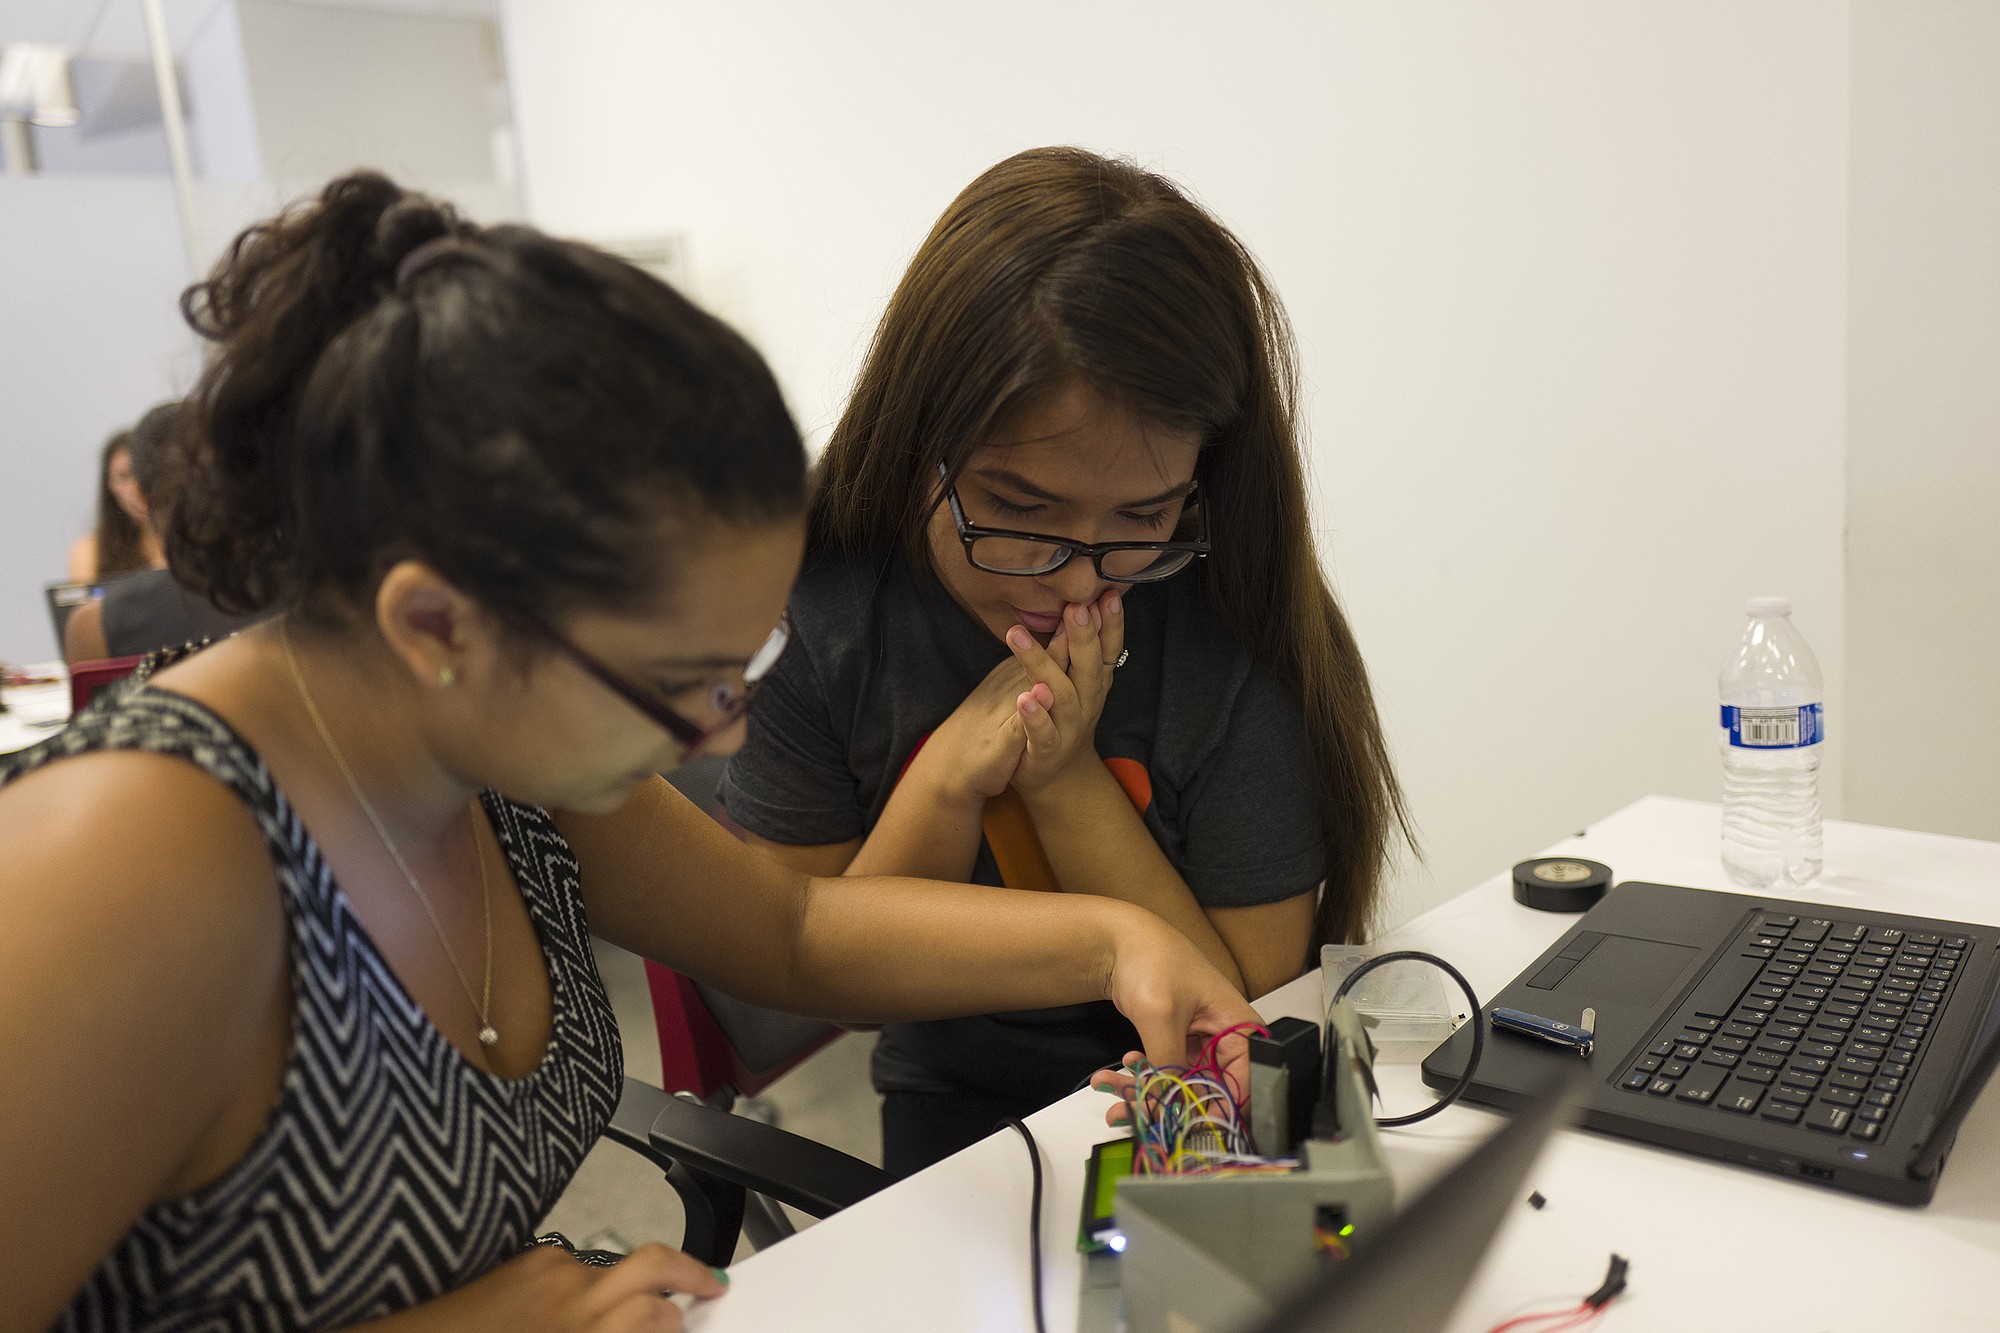 Nikki Kahn/The Washington Post
India Bhalla-Ladd, 15, left, and Stephanie Villanueva, 17, work on their product, Plantech, during the Girls Who Code Summer Immersion Program at Georgetown University.